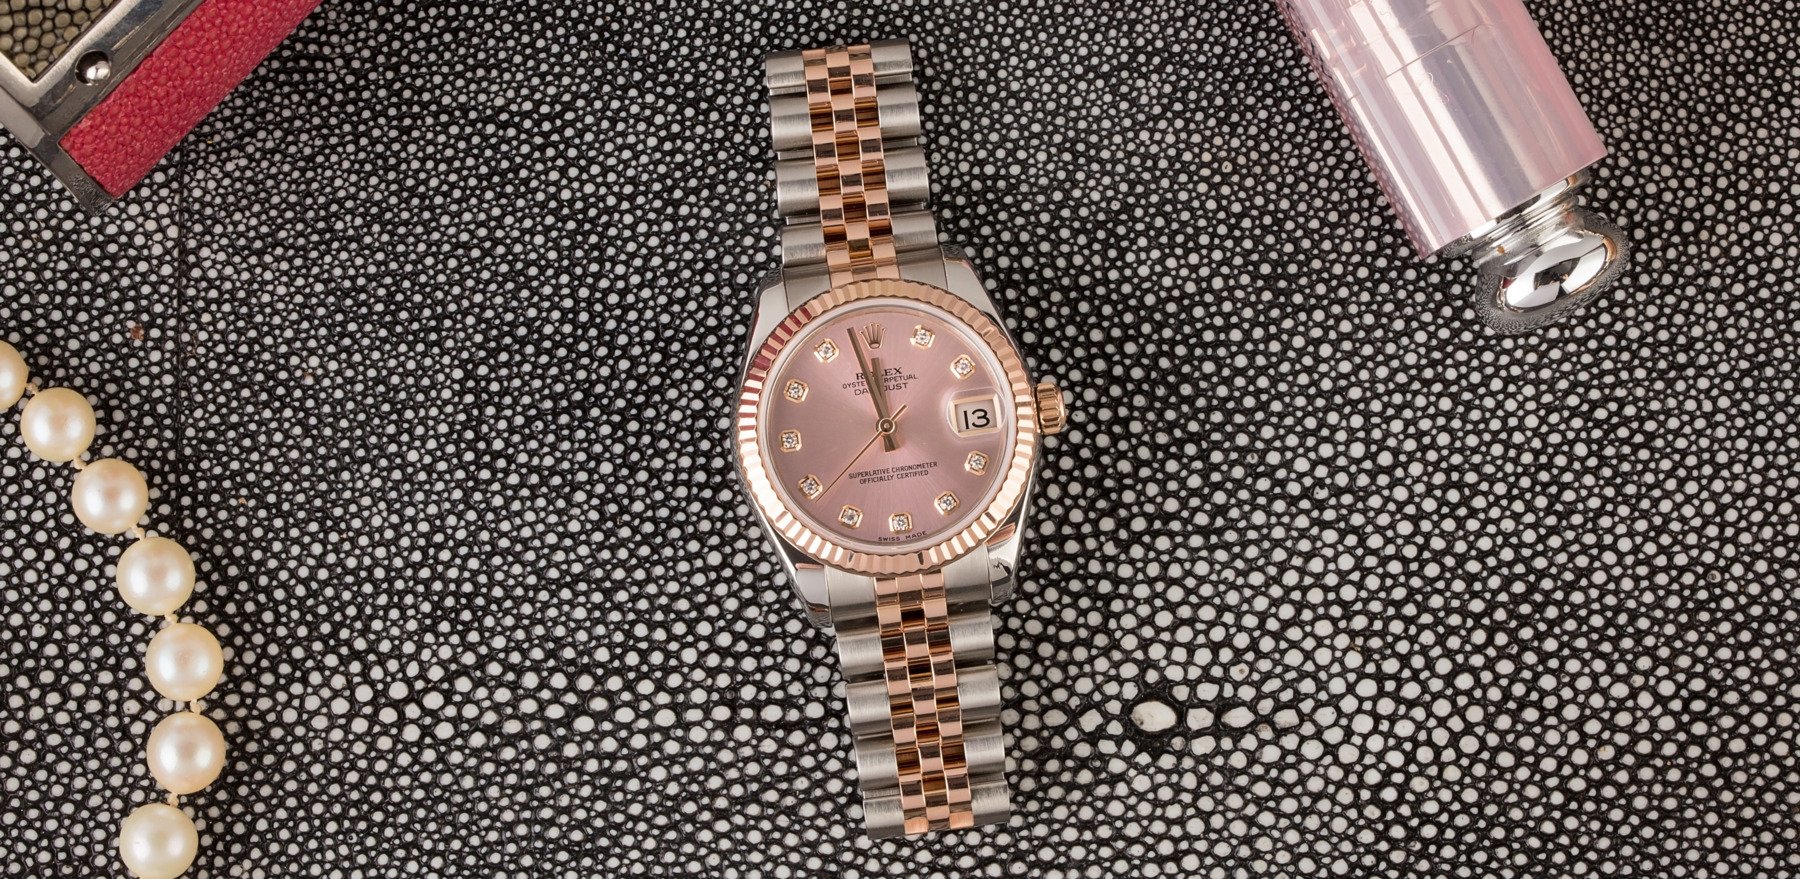 The Rolex Oyster Perpetual Lady Datejust 31